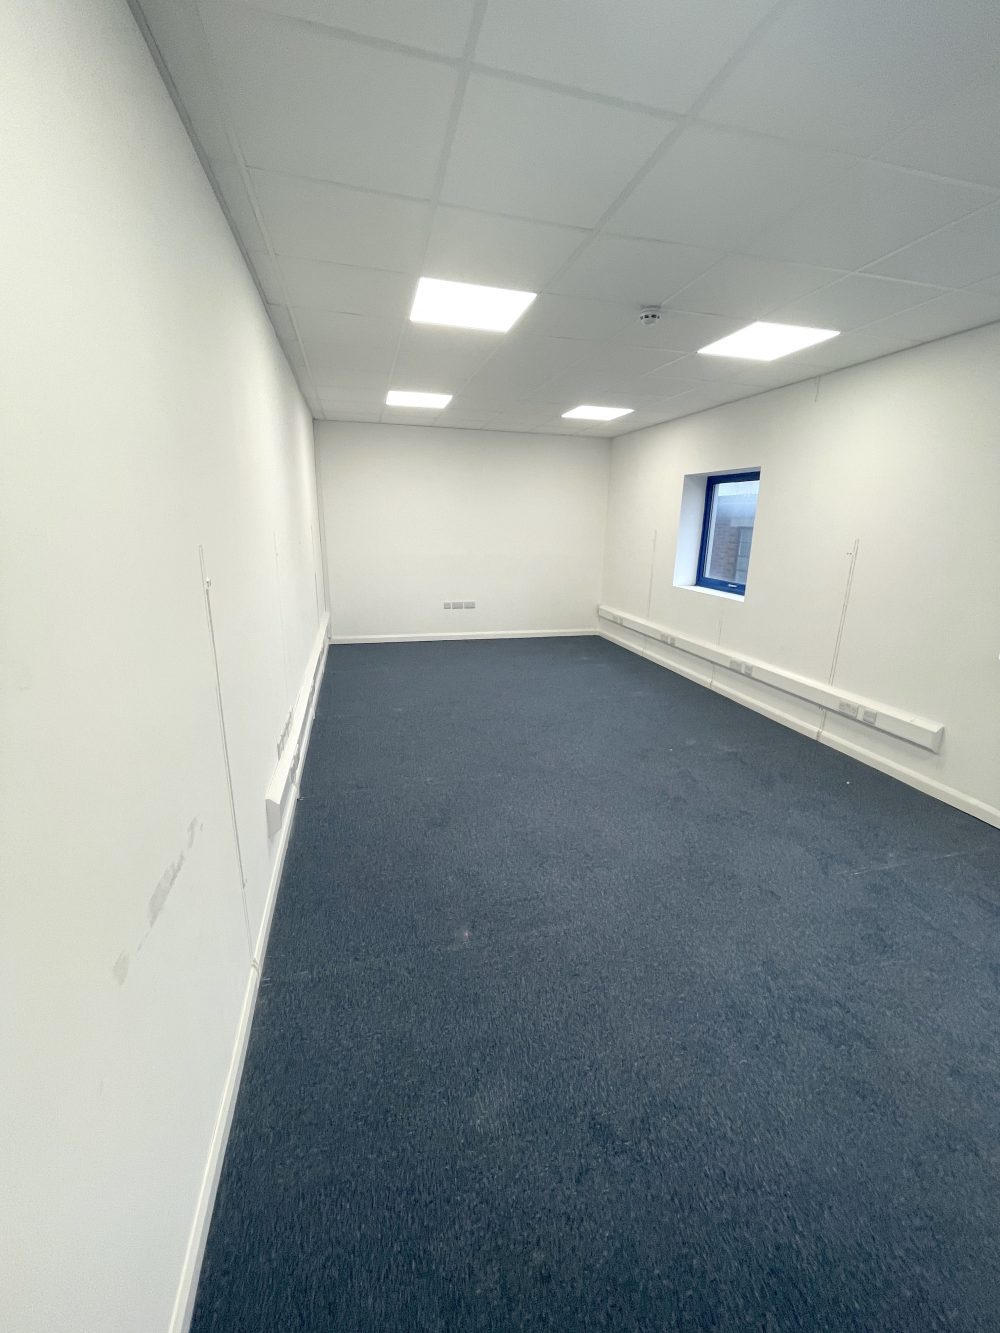 First floor office space : light idustrial creative artist studio to rent in E18 S South Woodford Pic 6